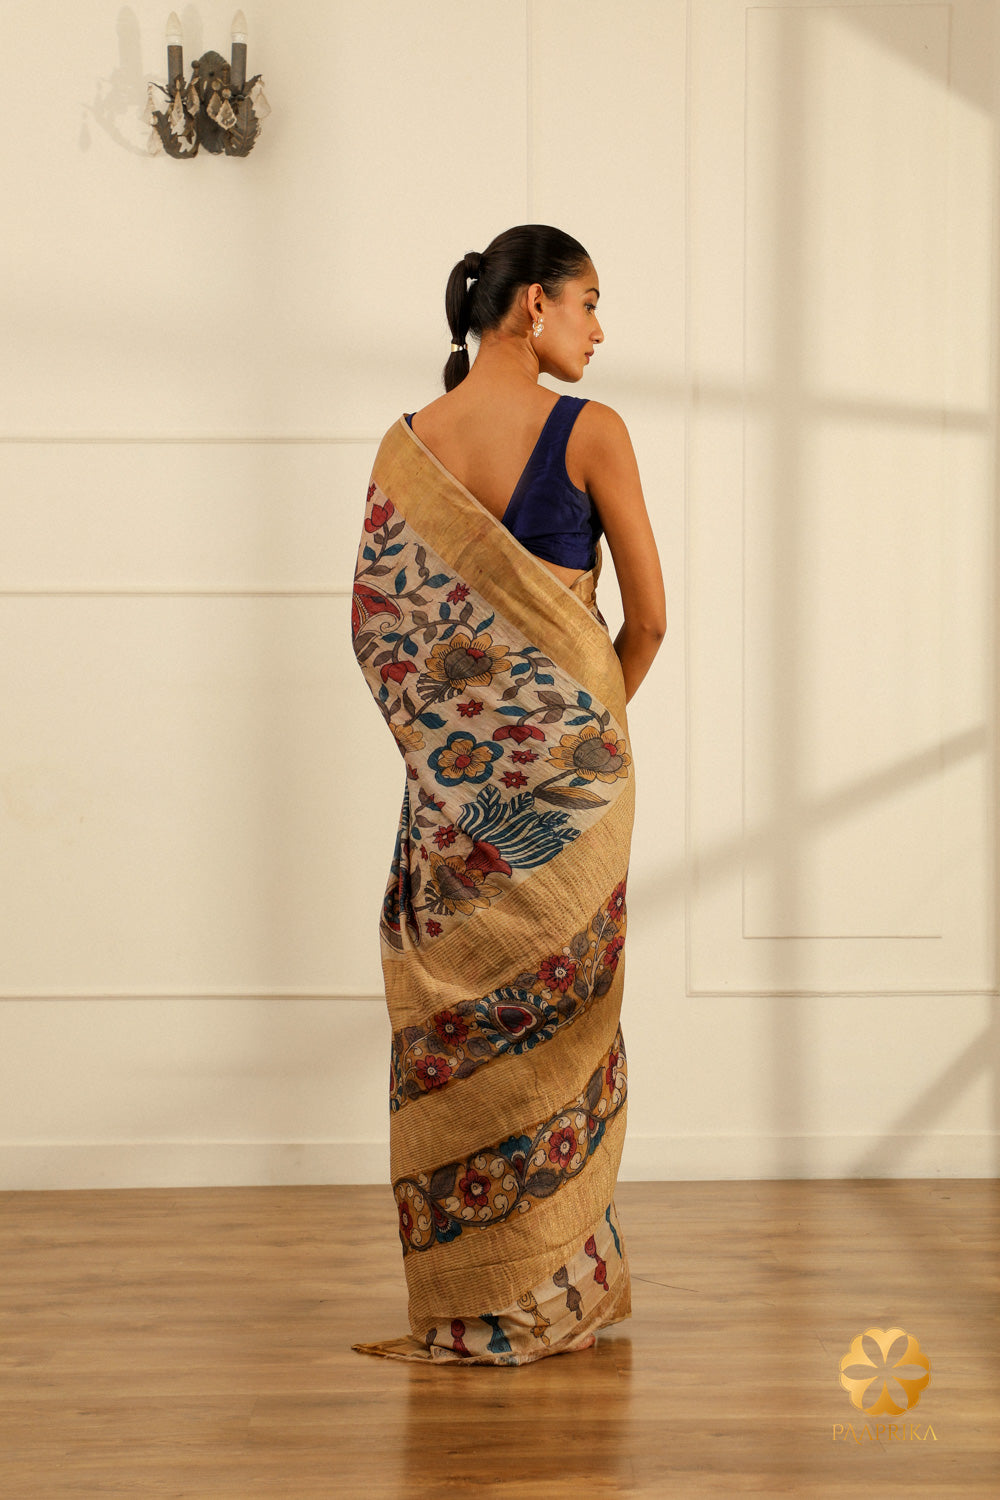 The saree elegantly displayed on a mannequin, capturing the beauty of the Kalamkari floral motifs and the lustrous Tussar silk in a serene cream hue.